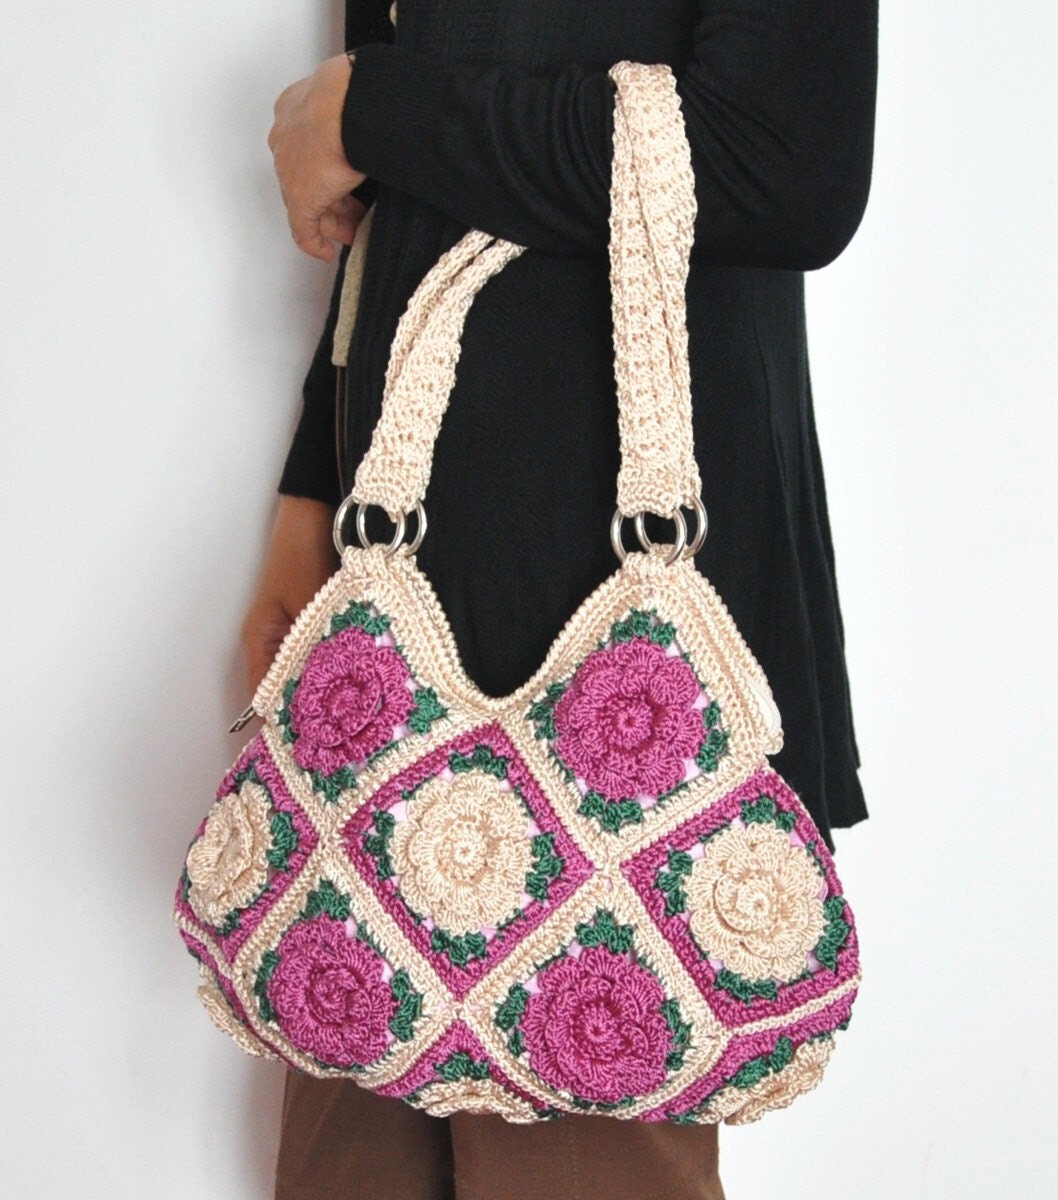 FLORAL BAG 7 Hand Crochet Multicolor Floral Bag with Lining